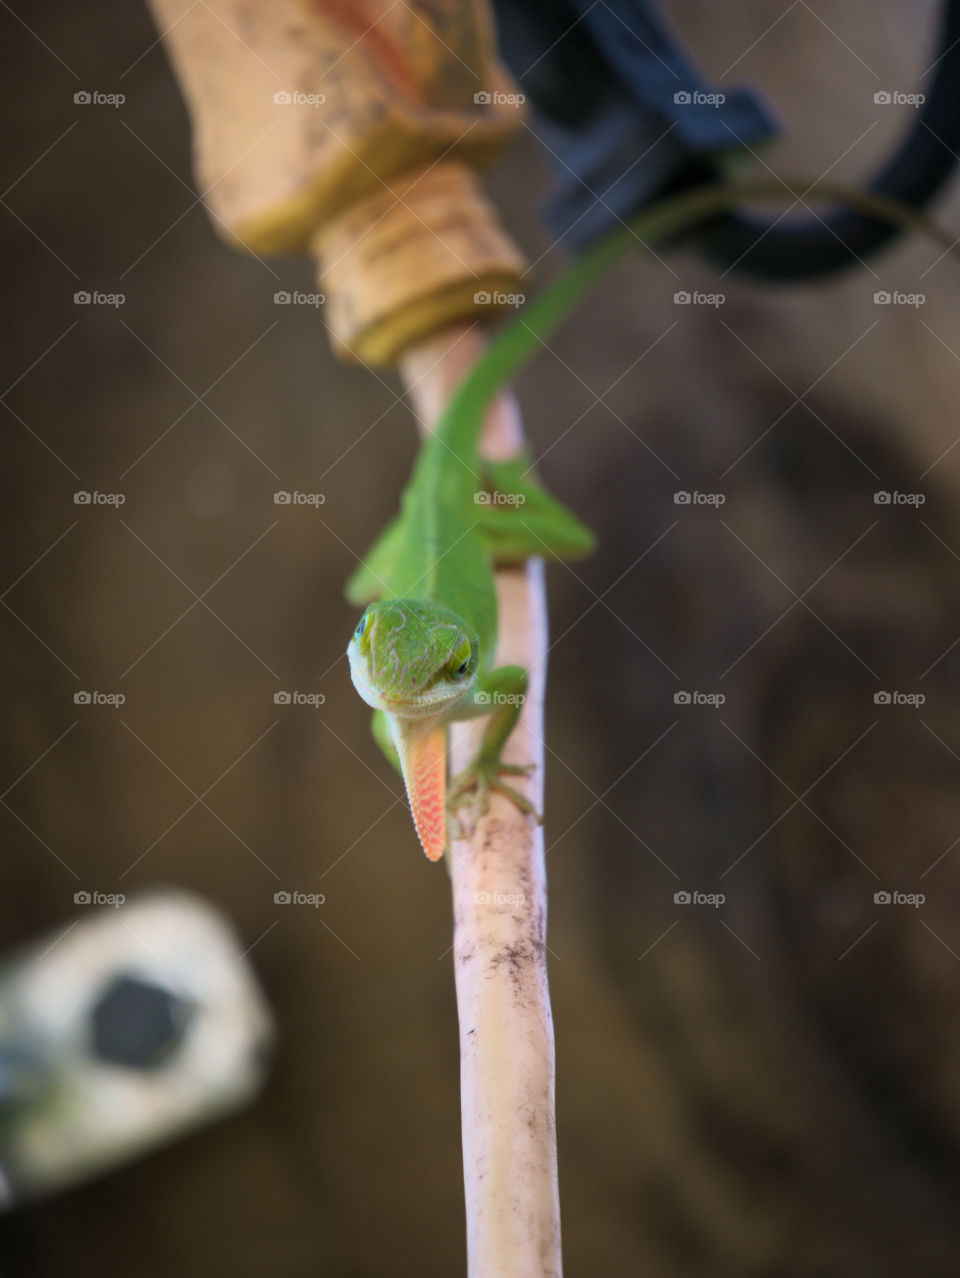 Green Anole with his Dewlap Extended, Checking Out his Reflection in the Camera Lens